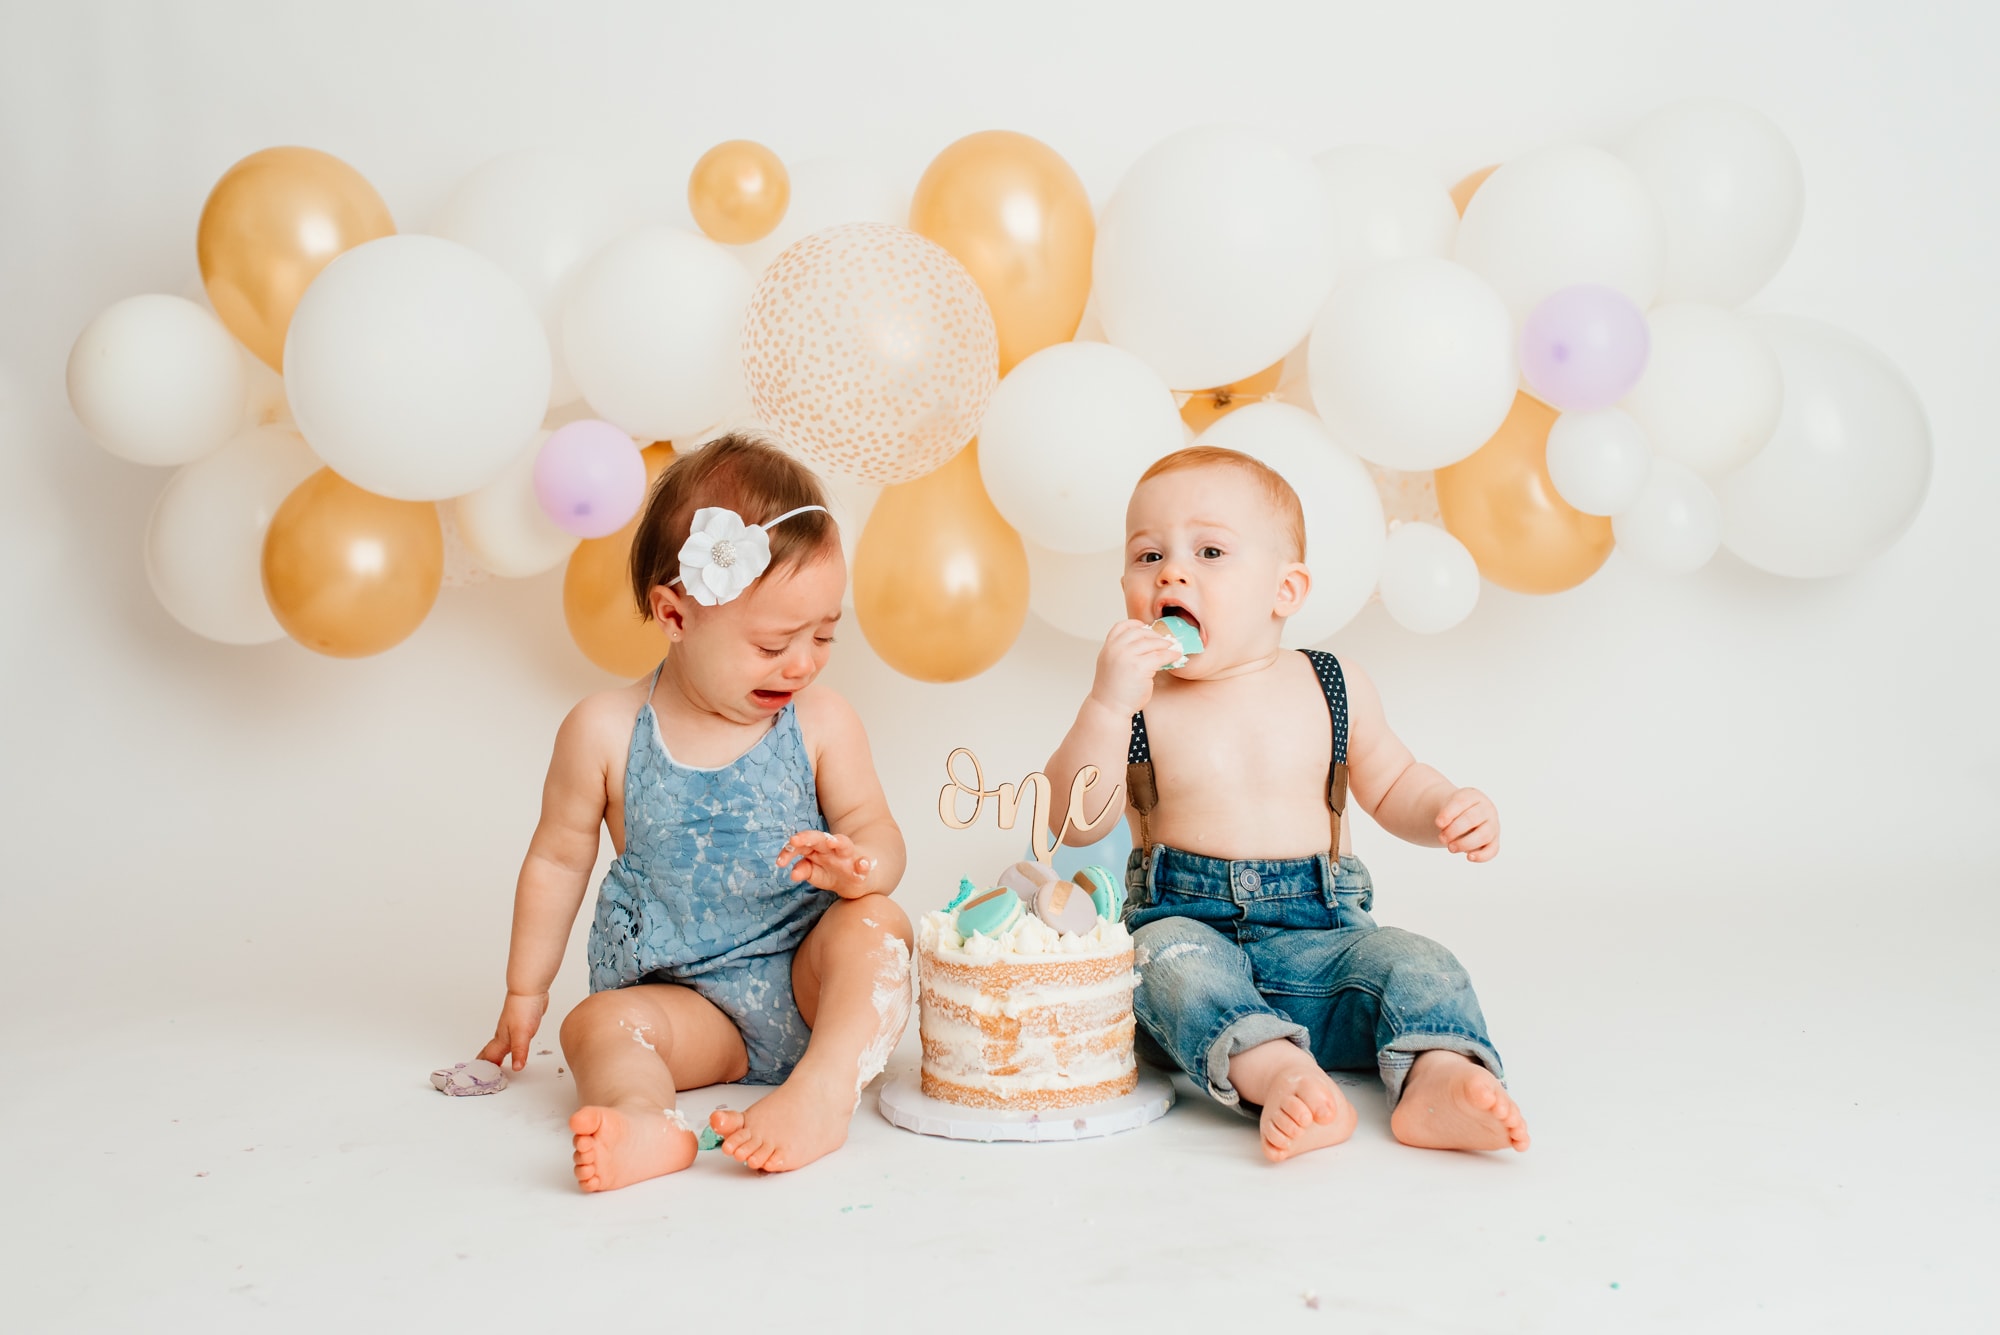 Funny cake smash for twins with white and gold balloon garland. Boy is eating cake while girl is crying.